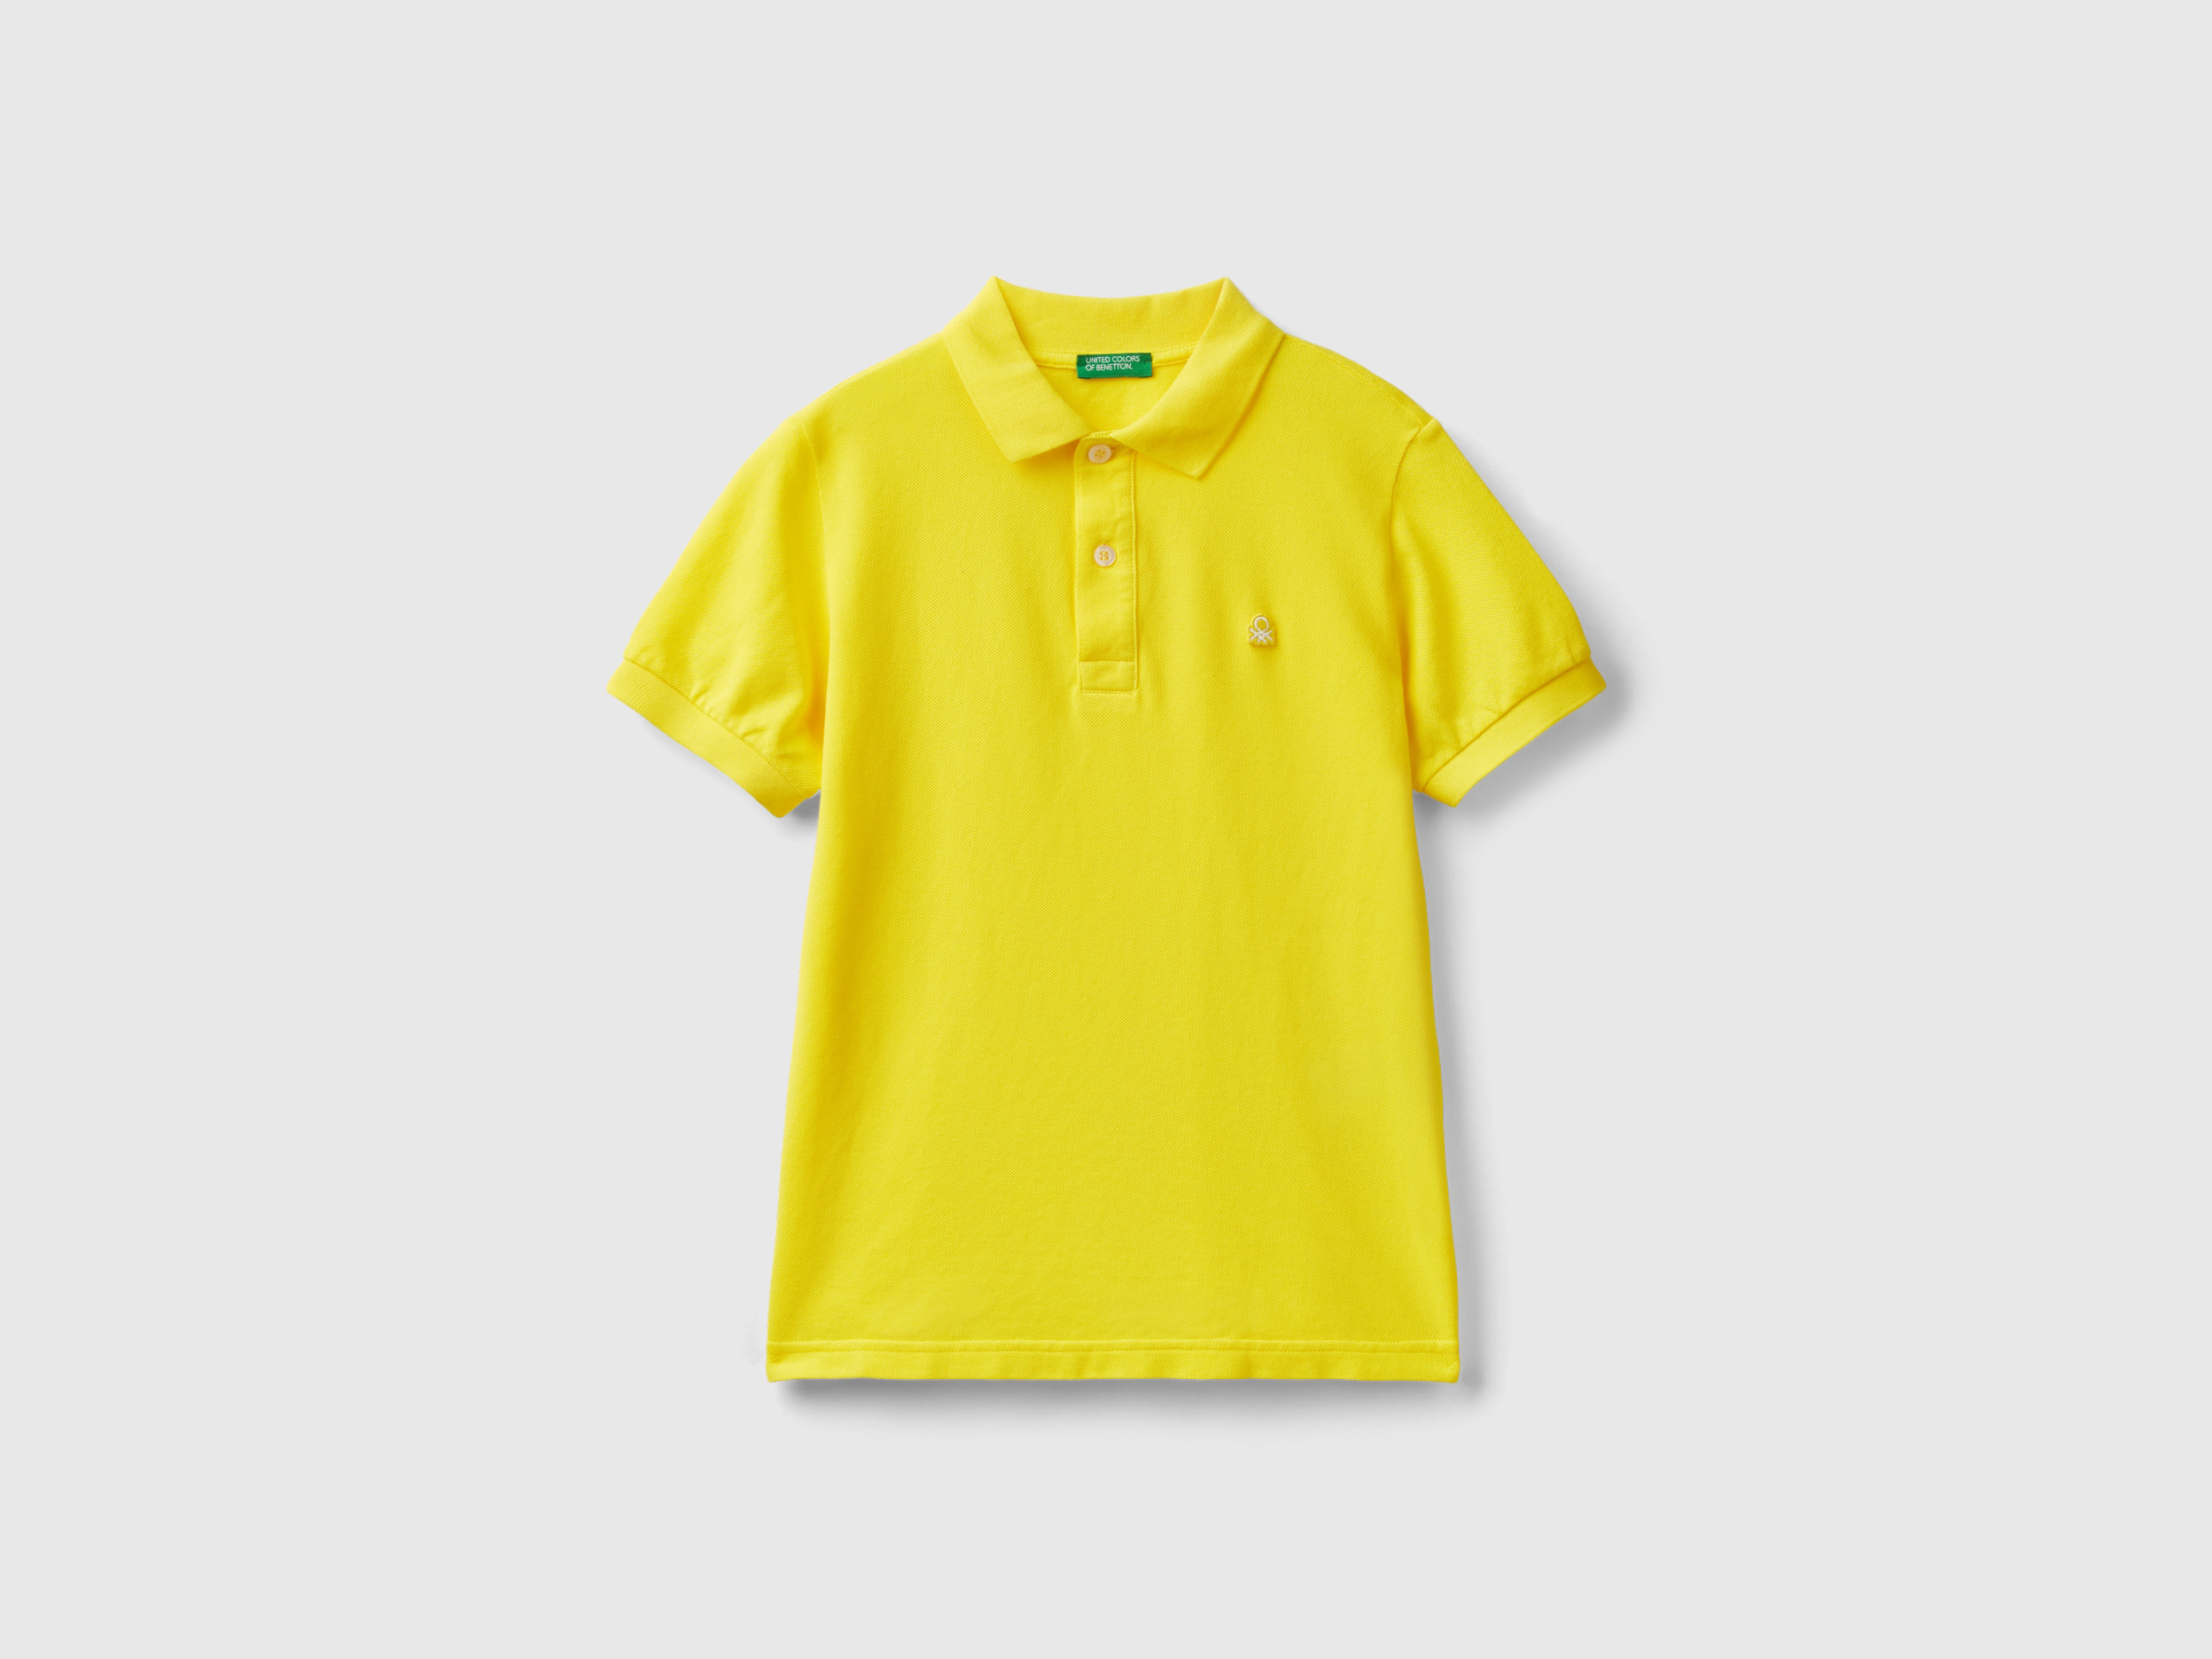 Image of Benetton, Slim Fit Polo In 100% Organic Cotton, size 2XL, Yellow, Kids